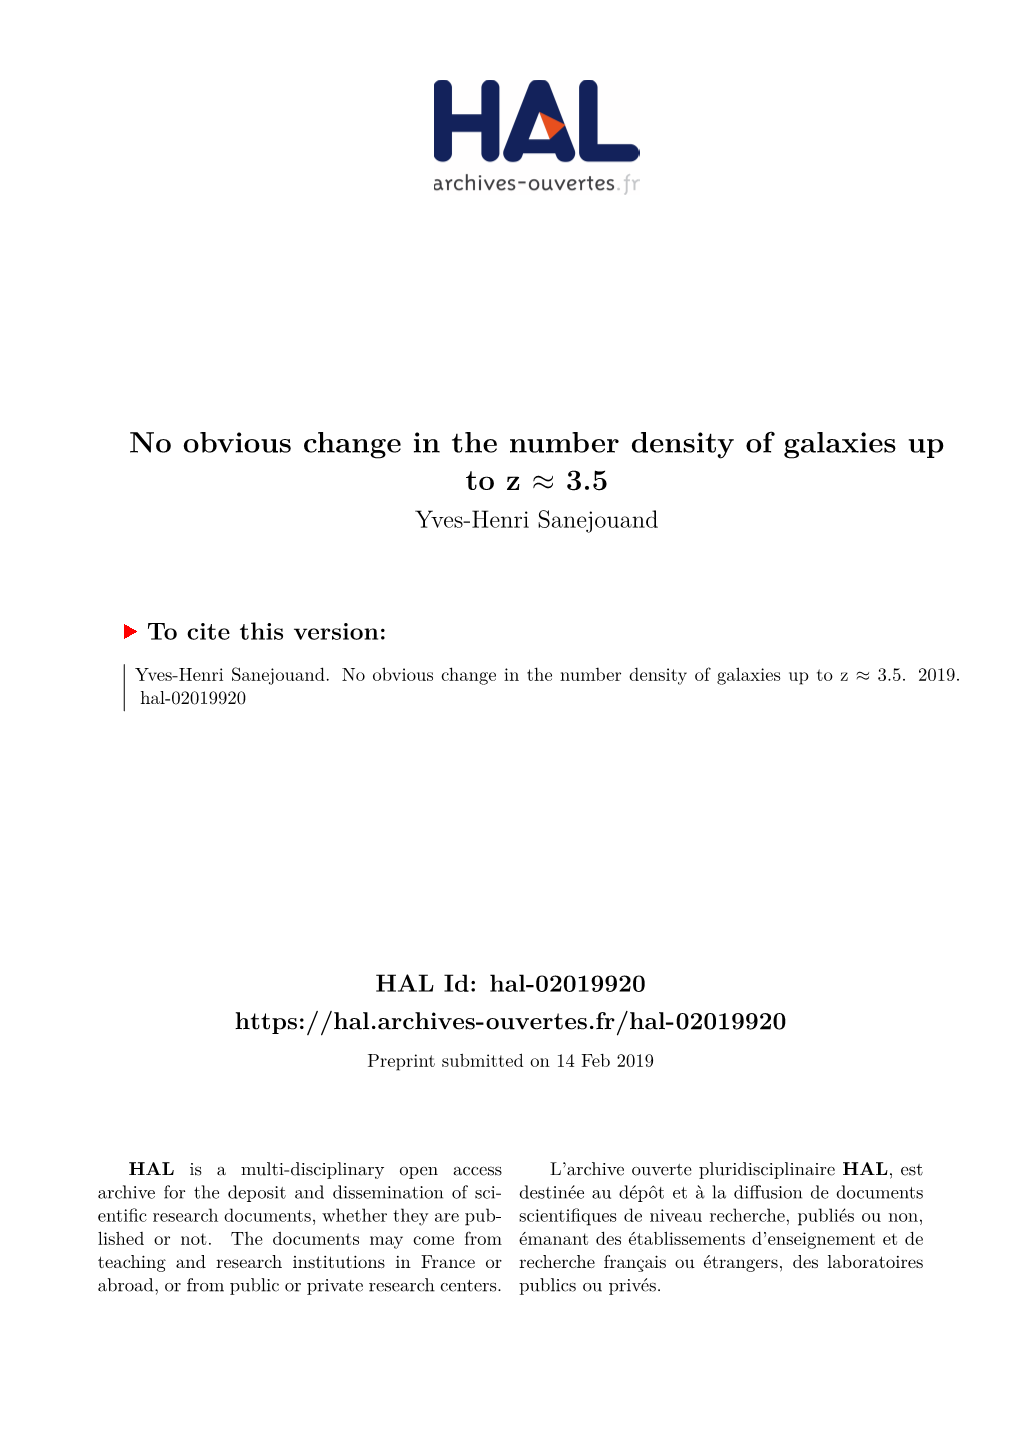 No Obvious Change in the Number Density of Galaxies up to Z ≈ 3.5 Yves-Henri Sanejouand